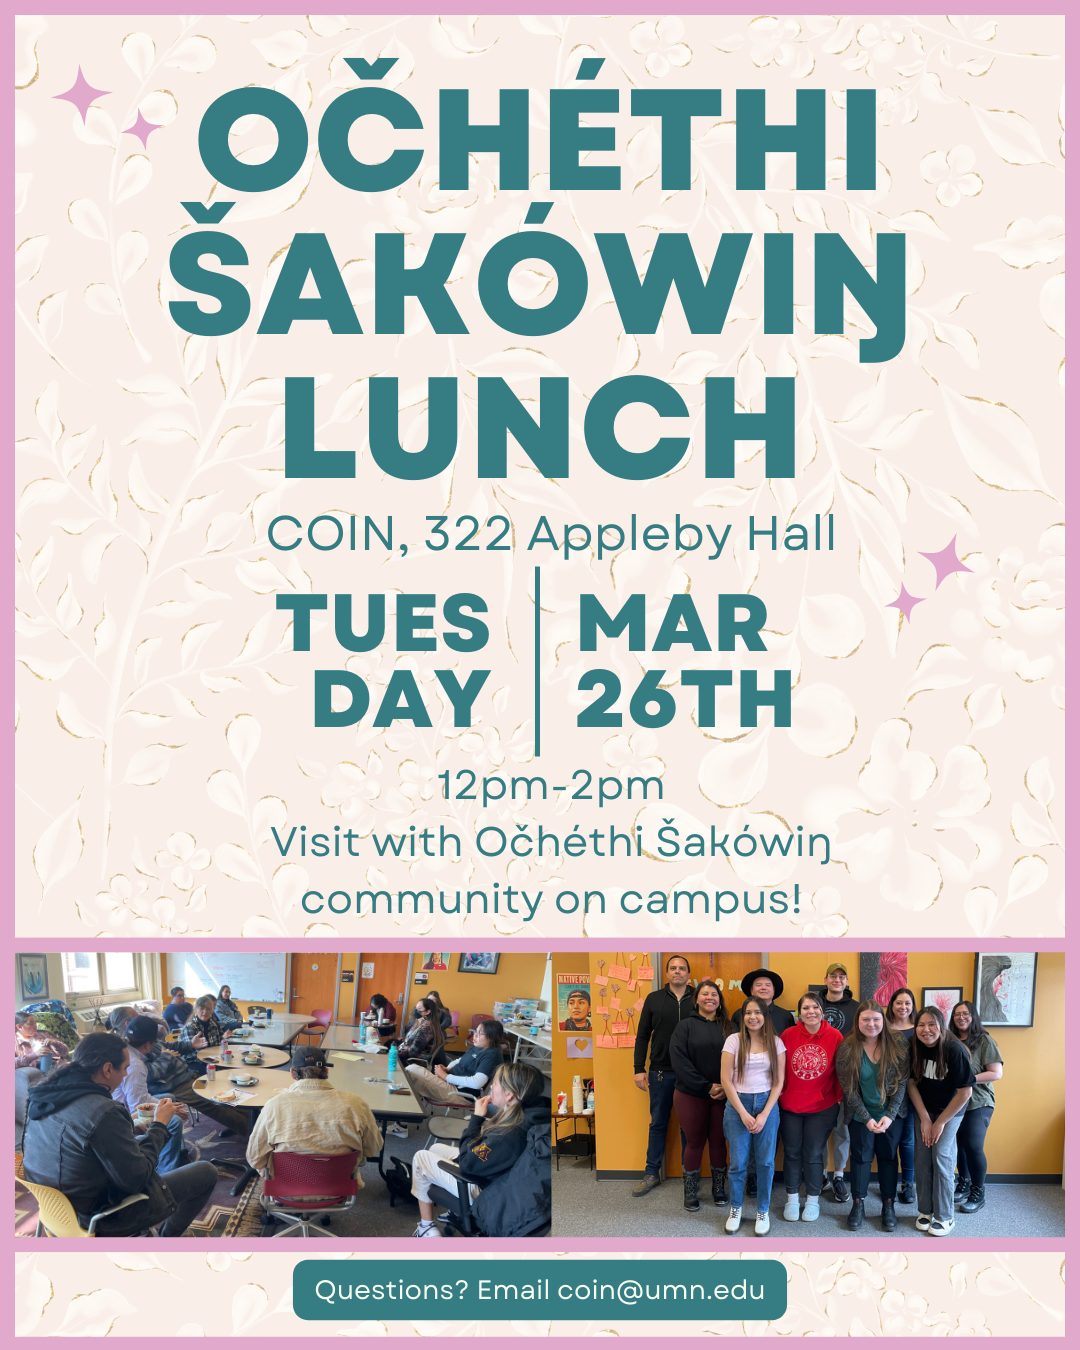 Očhéthi Šakówiŋ Lunch Gathering in COIN, 322 Appleby Hall on Tuesday, March 26th from 12pm until 2pm. Visit with Očhéthi Šakówiŋ community on campus! Questions? Contact coin@umn.edu